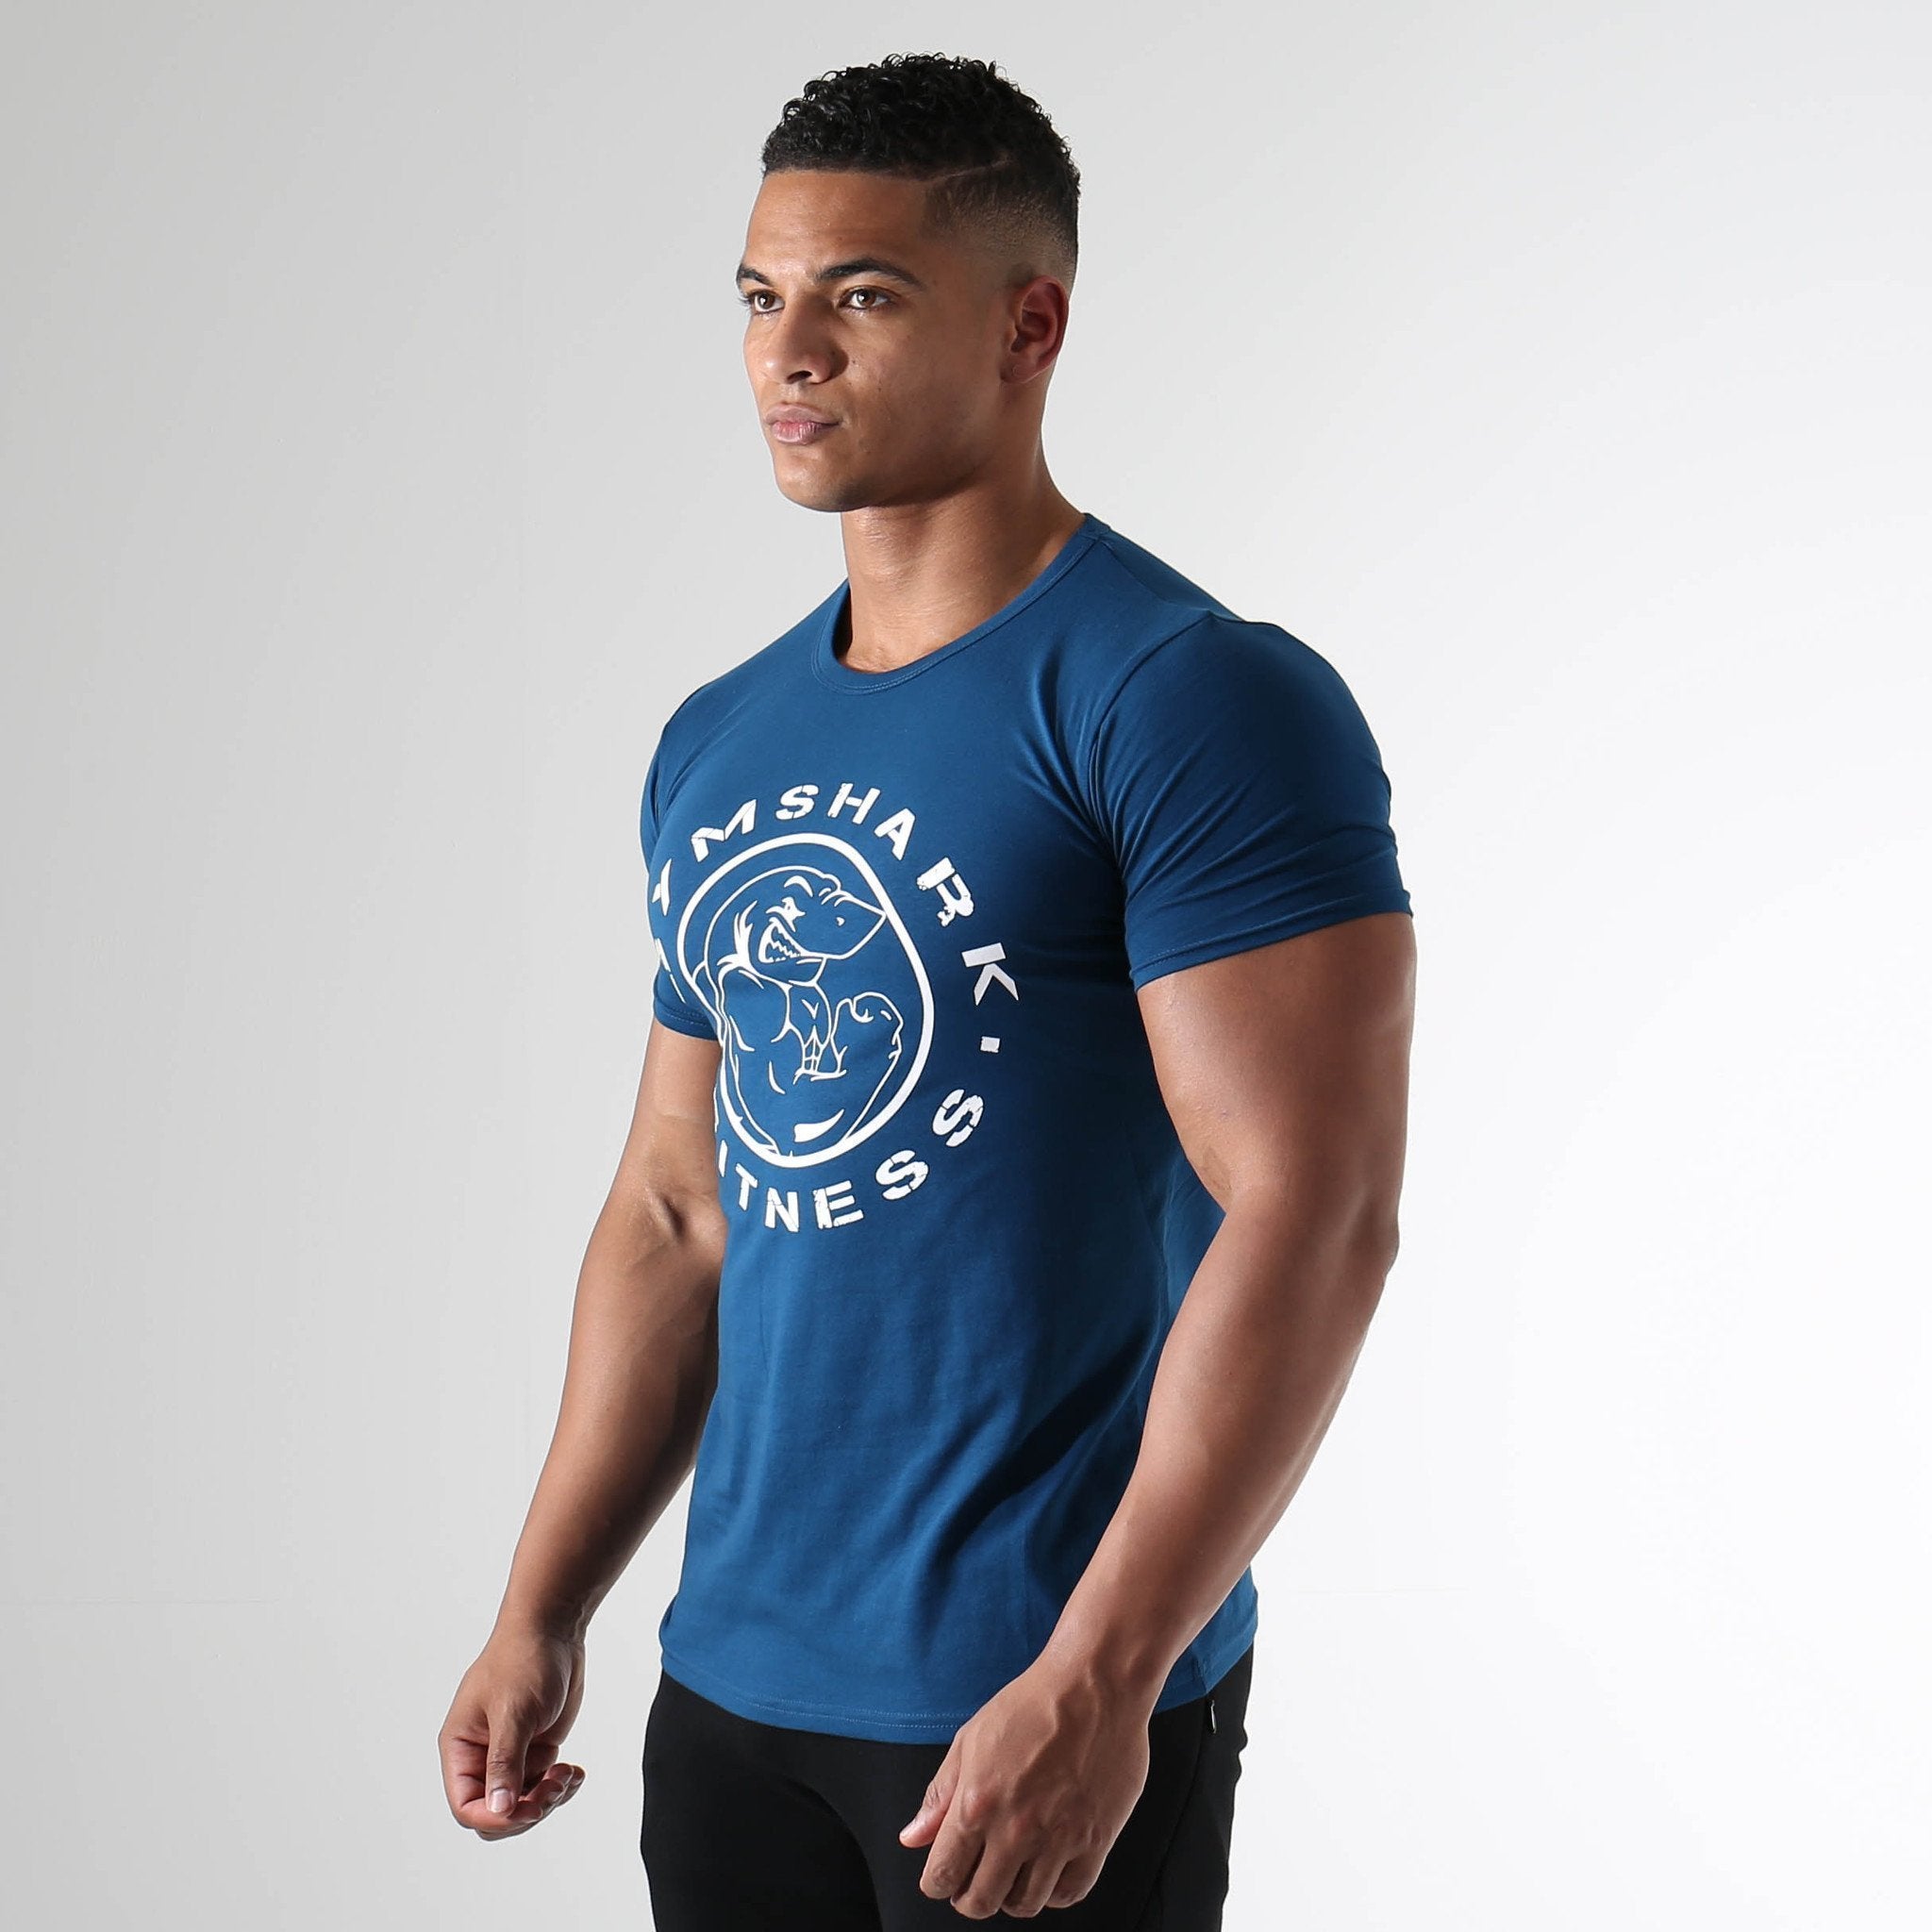 Fitness T-Shirt in Atlantic Blue - view 3